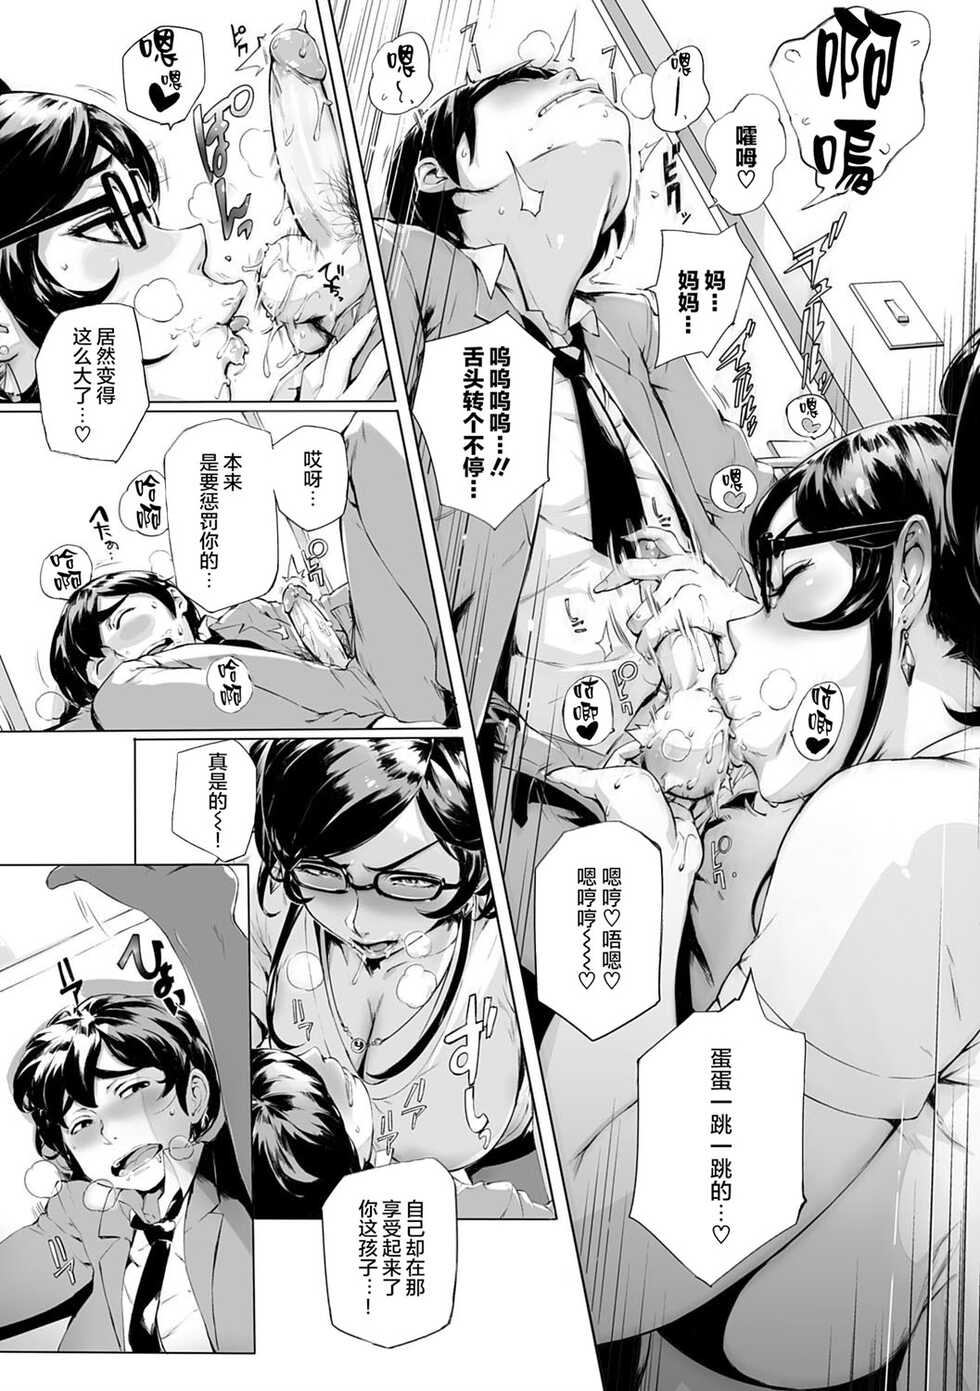 [Oltlo] Wagamama Steady (COMIC Anthurium 027 2015-07) [Chinese] [EVENING个人改图+丧尸×无毒汉化] [Decensored] [Digital] - Page 13